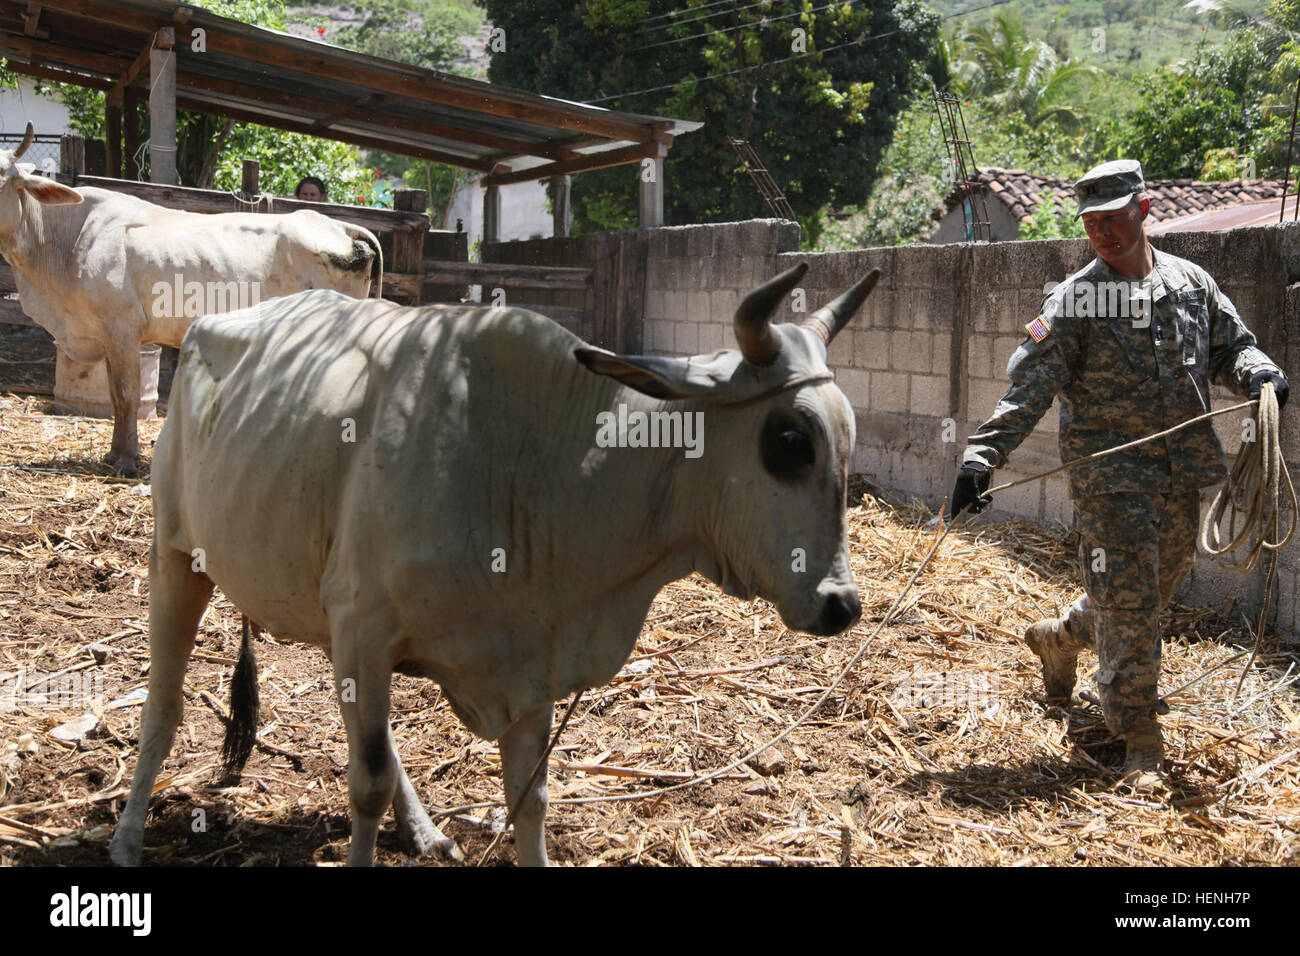 U.S. Army Capt. James Mckasson, of the 149th Medical Detachment Veterinary Services, lassos a cow for a Veterinary Readiness Training Exercise during Beyond the Horizon, San Jose, Guatemala, May 25, 2015. Beyond the Horizon is an annual exercise that embraces the partnership between the United States and Guatemala, to provide focused humanitarian assistance through various medical, dental, and civic action programs. (U.S. Army photo by Pfc. Christopher Martin/Released) Beyond the Horizon 2014, Guatemala 140525-A-GA303-134 Stock Photo